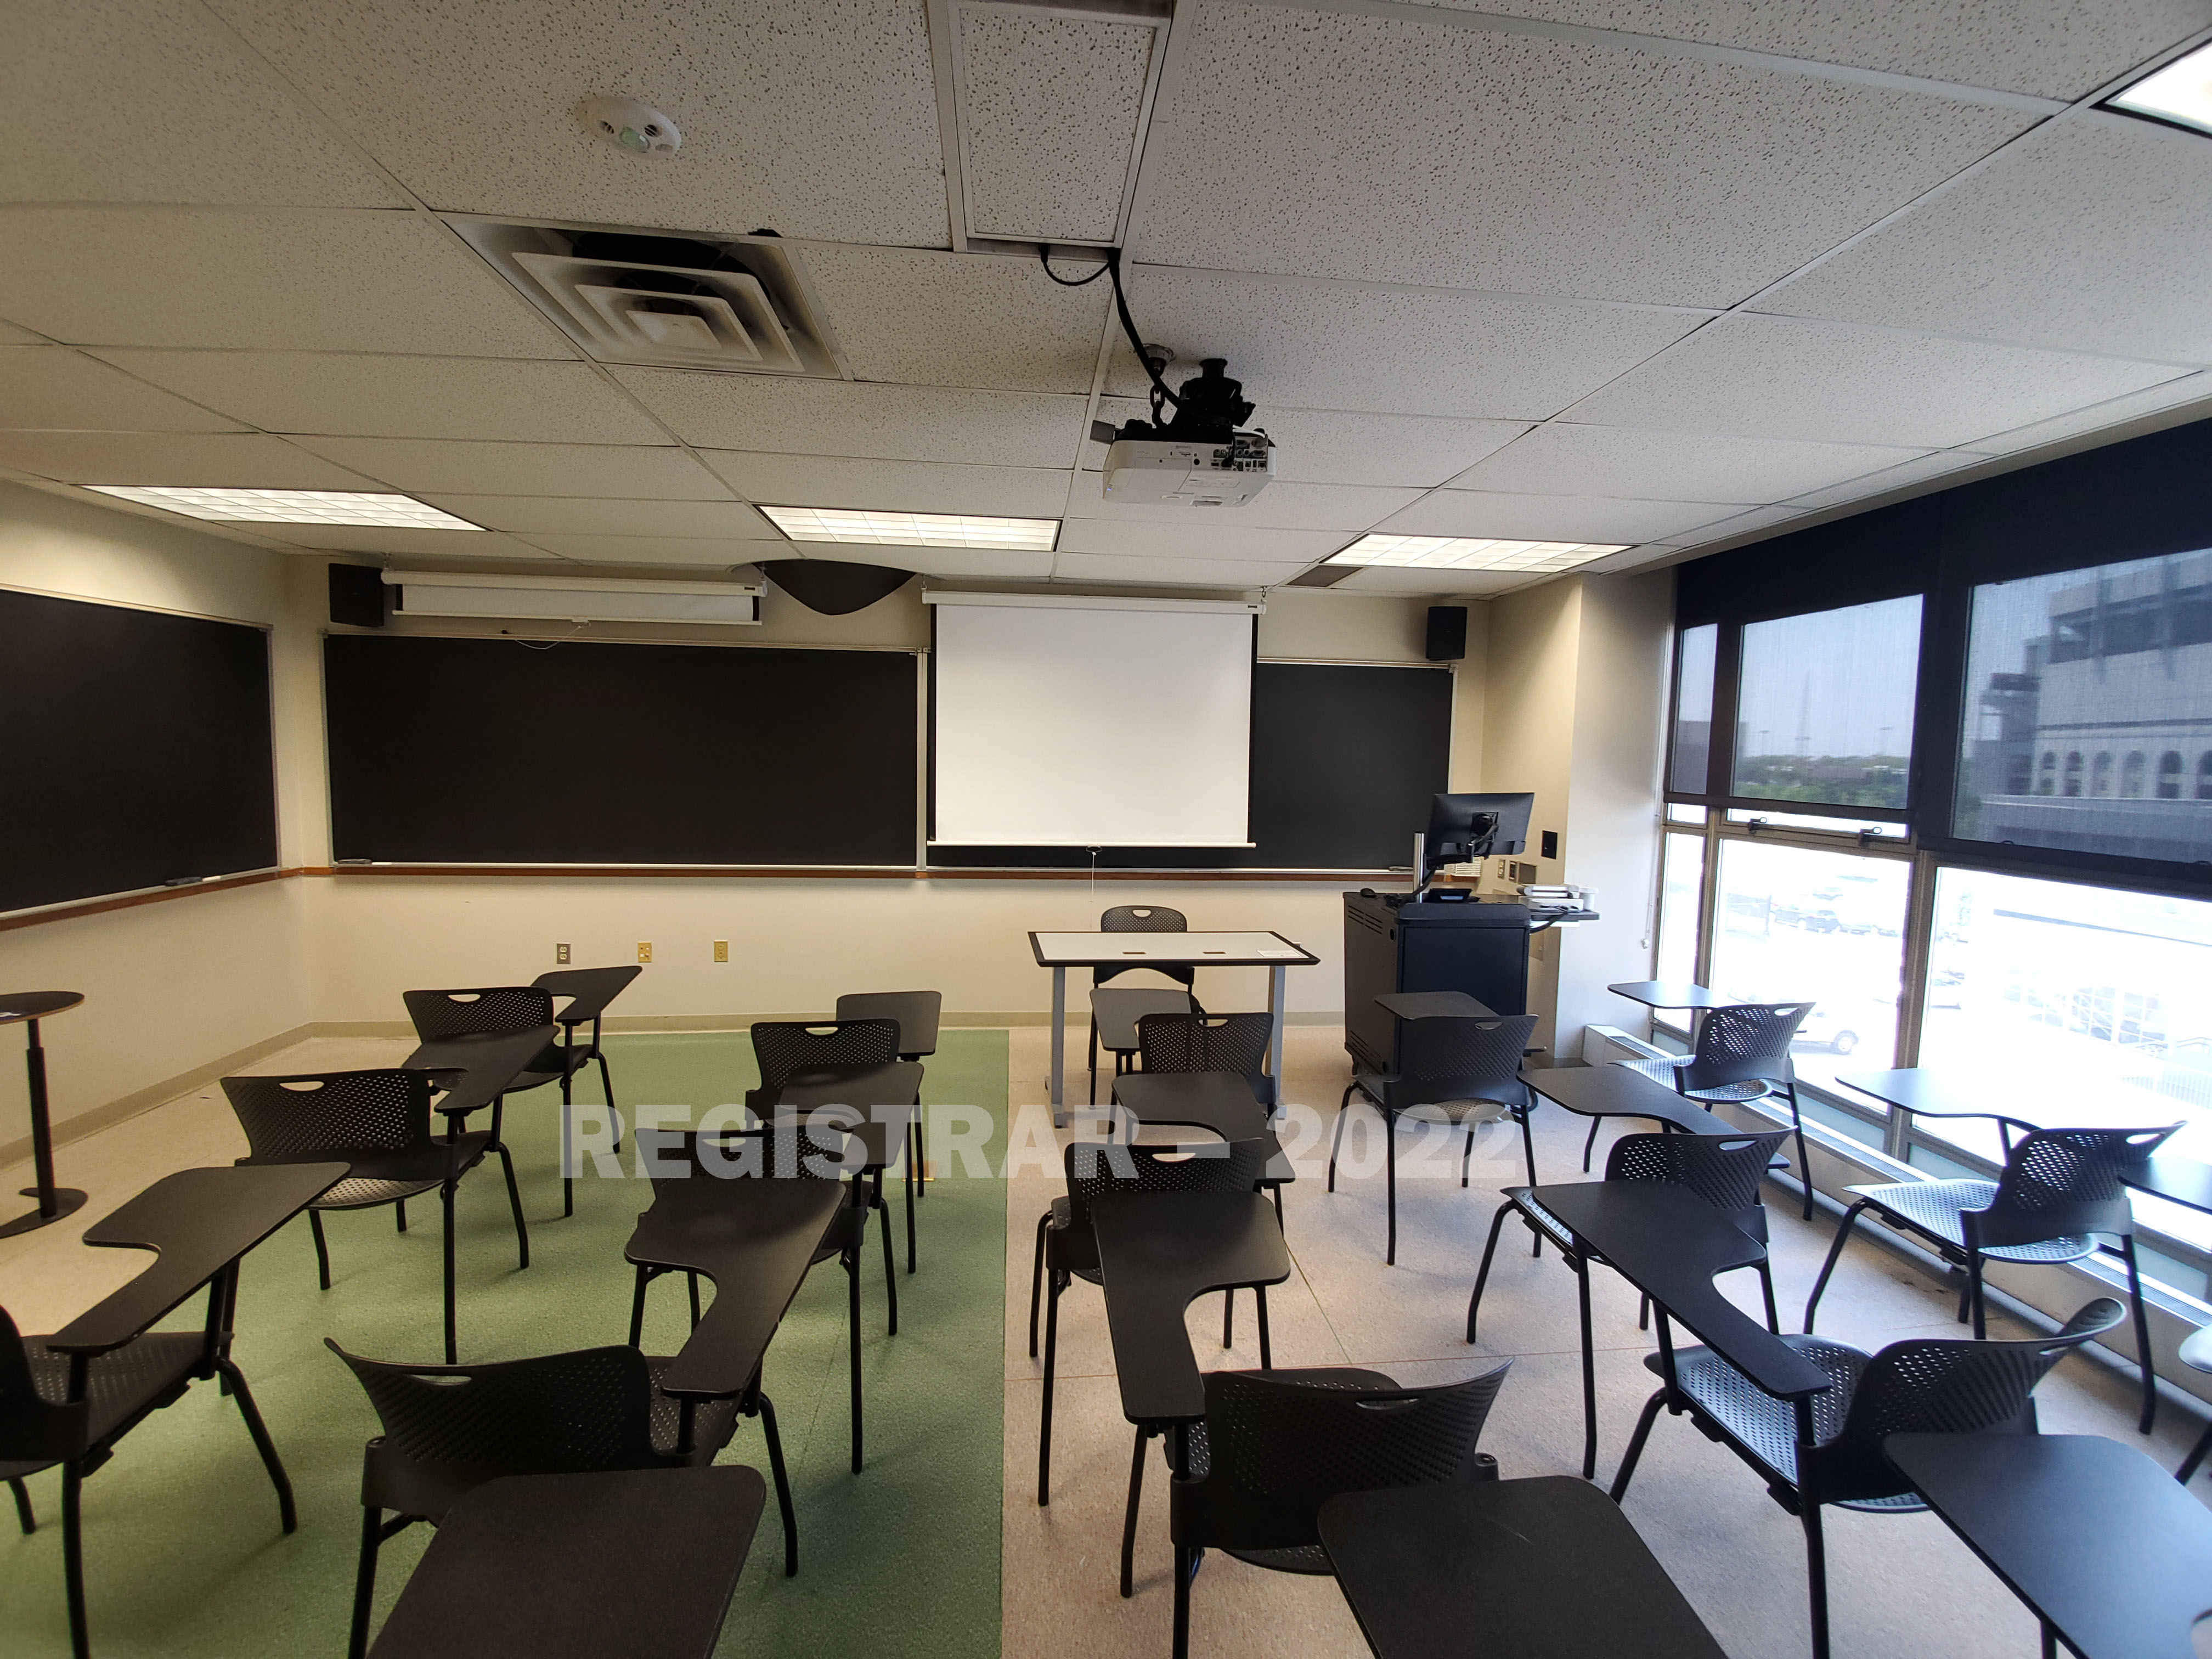 Enarson Classroom Building room 340 ultra wide angle view from the back of the room with projector screen down